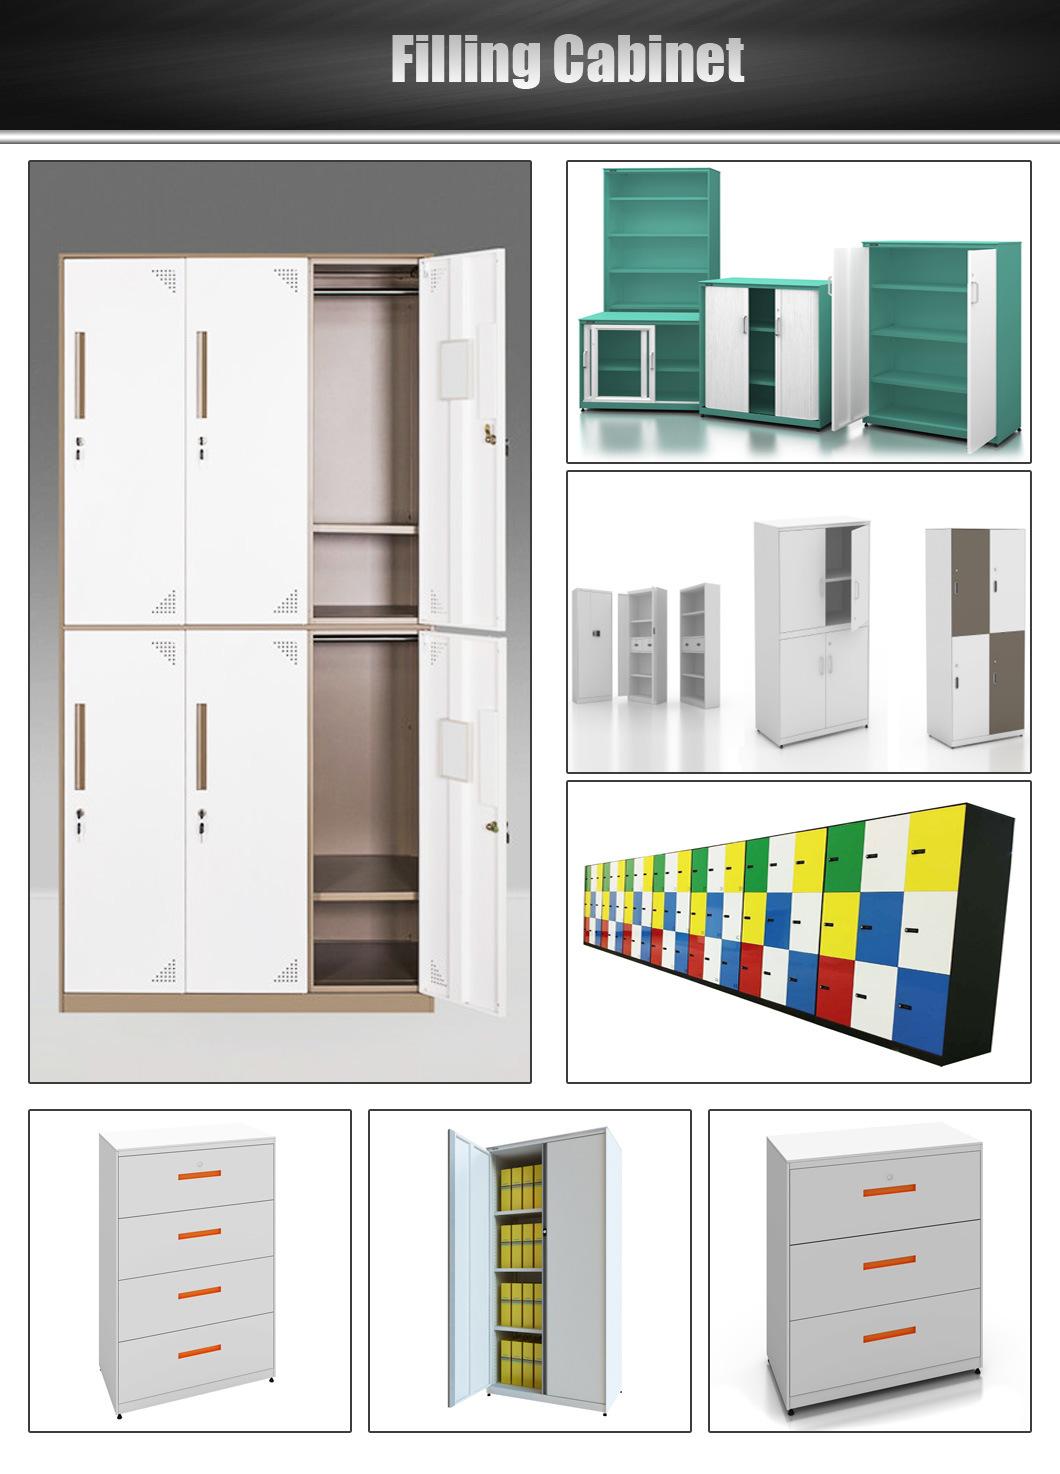 Attractive Design Work Storage Cabinets with Environmentally-Friendly Materials